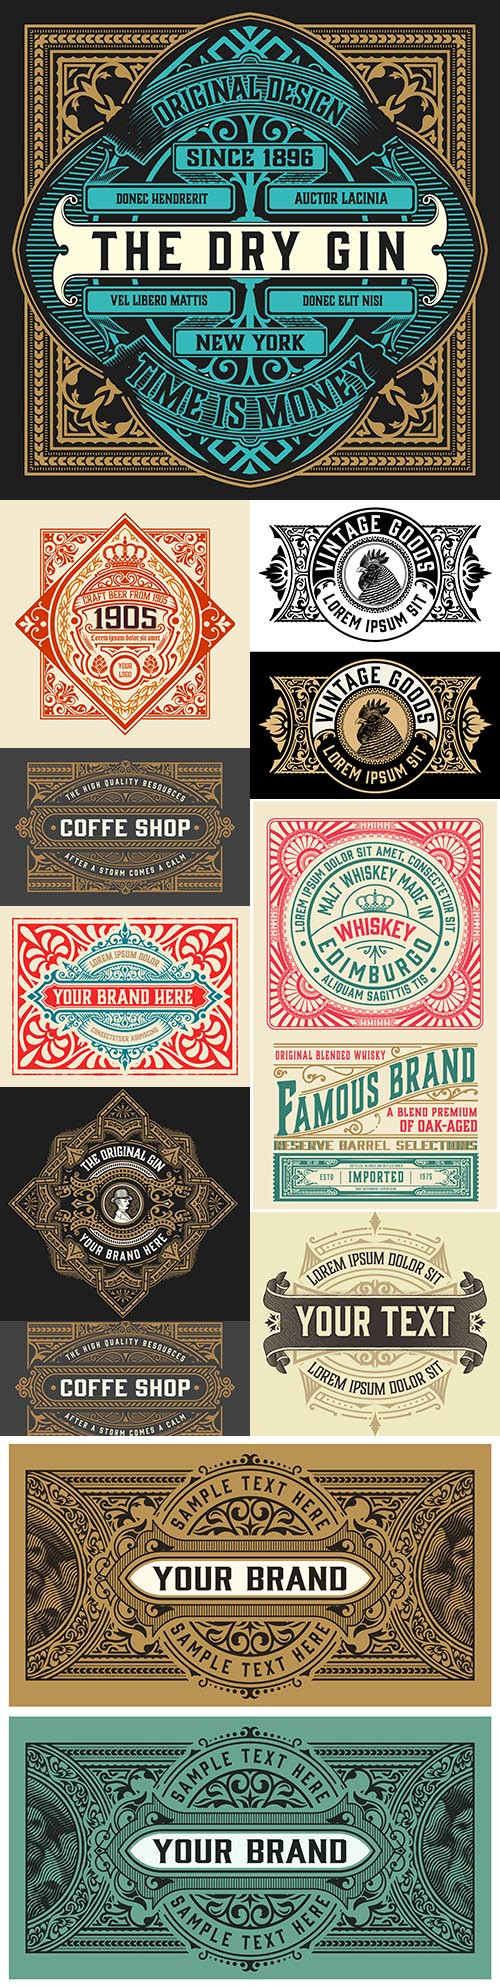 Vintage label whiskey with decorative elements
